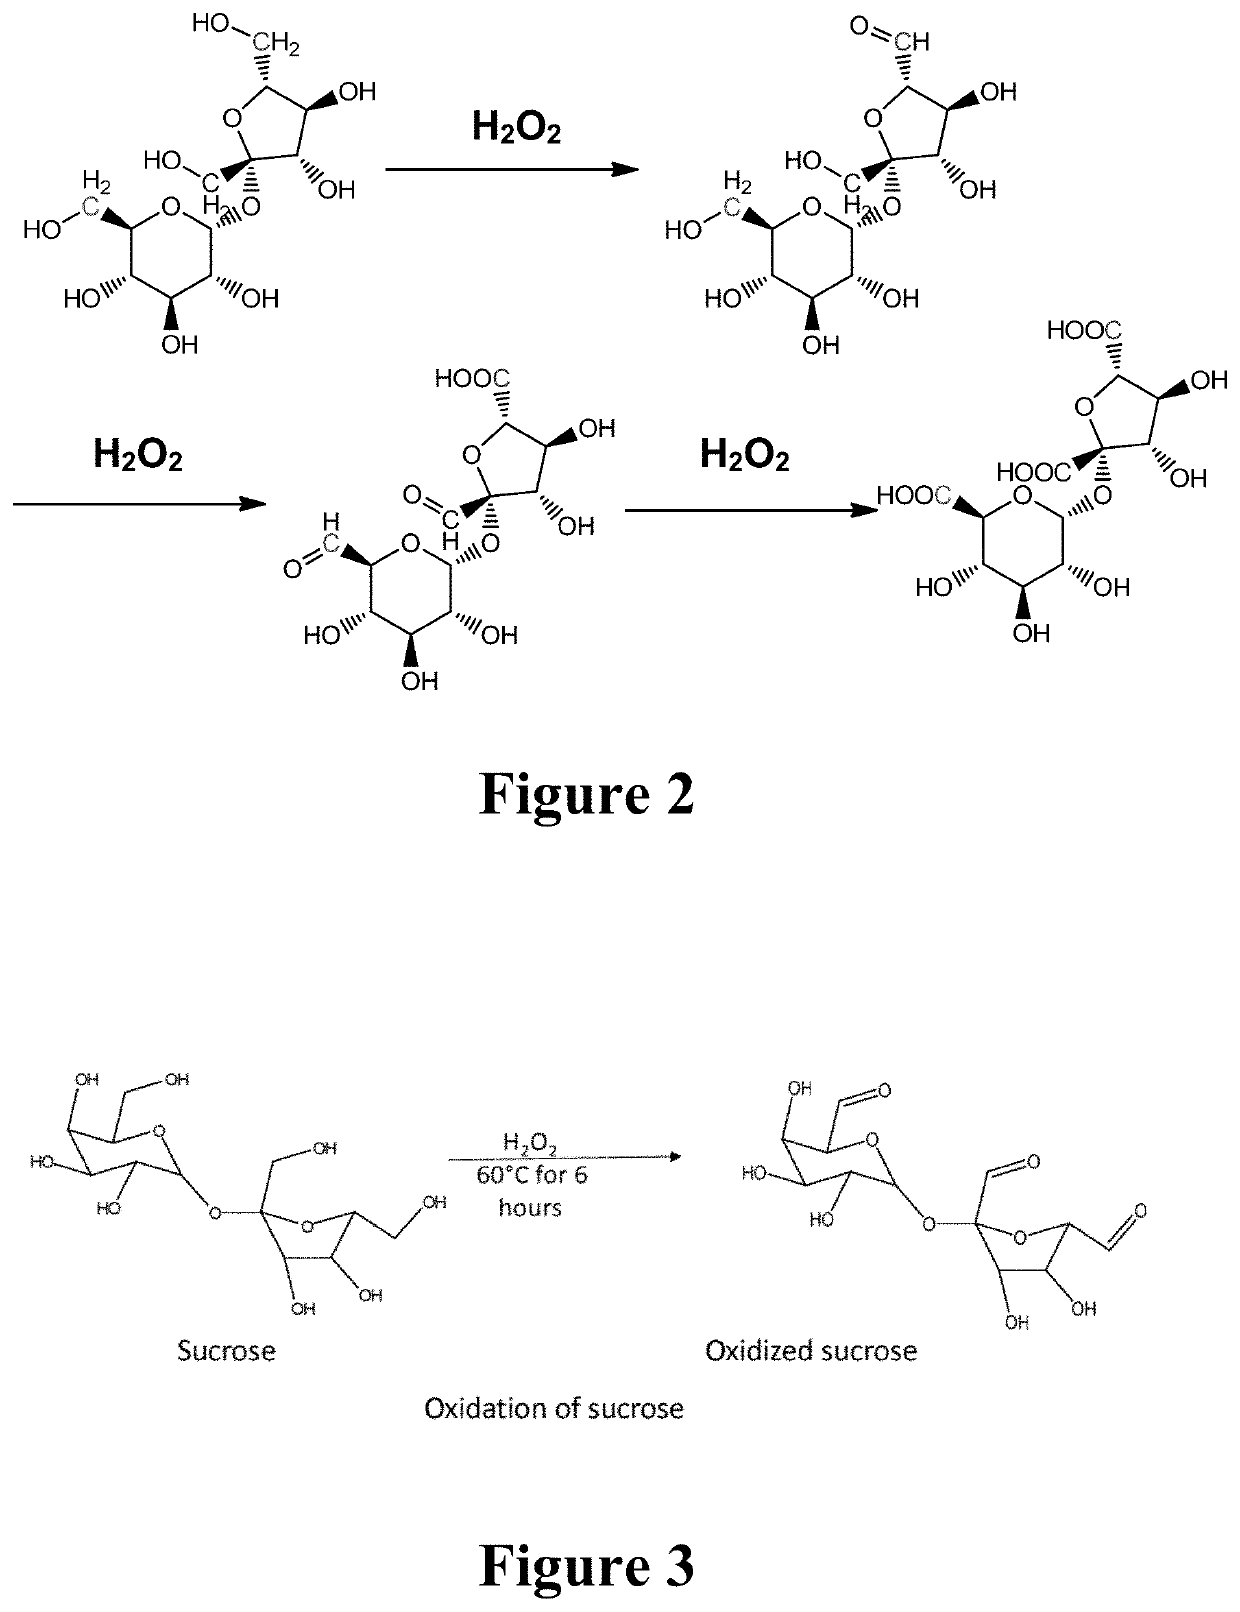 Residual soy flour sugars as crosslinkers for enhancing mechanical performance of protein fibers